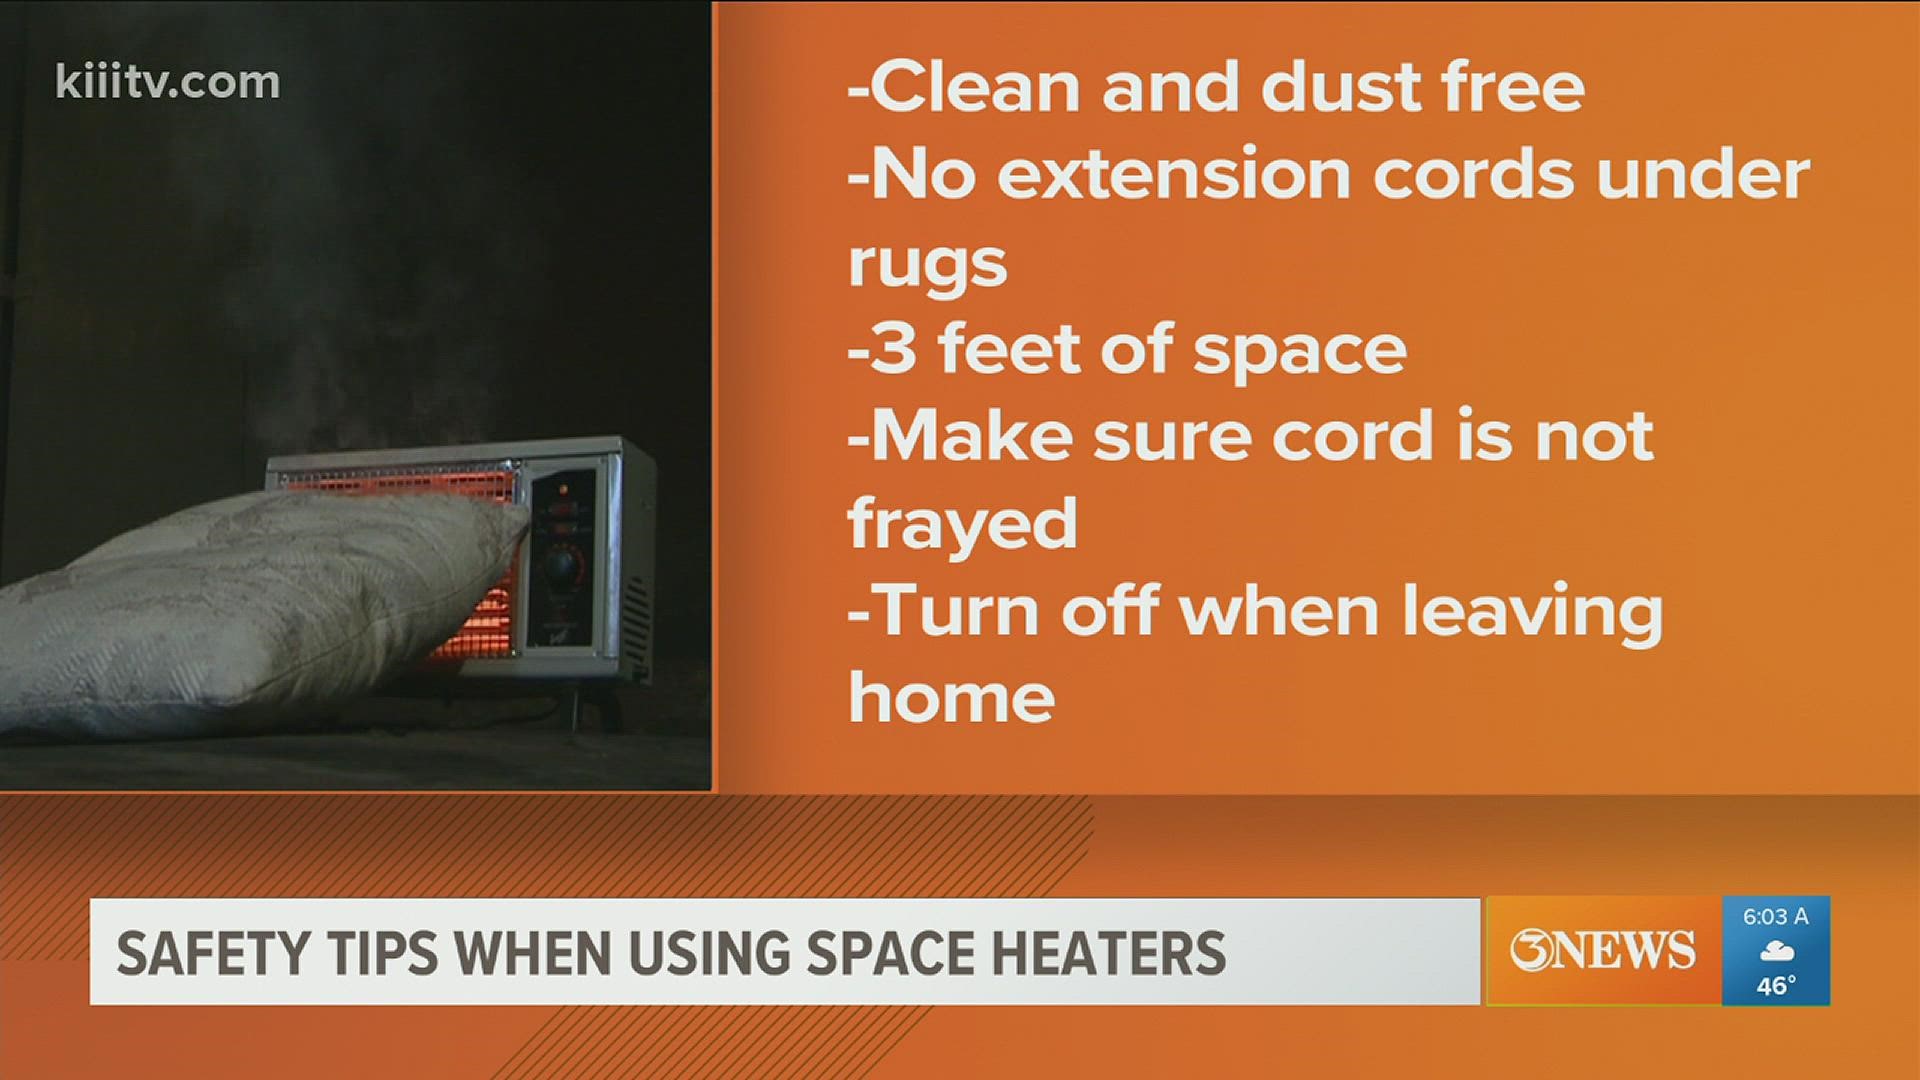 Ways to safely use a space heater in the chill